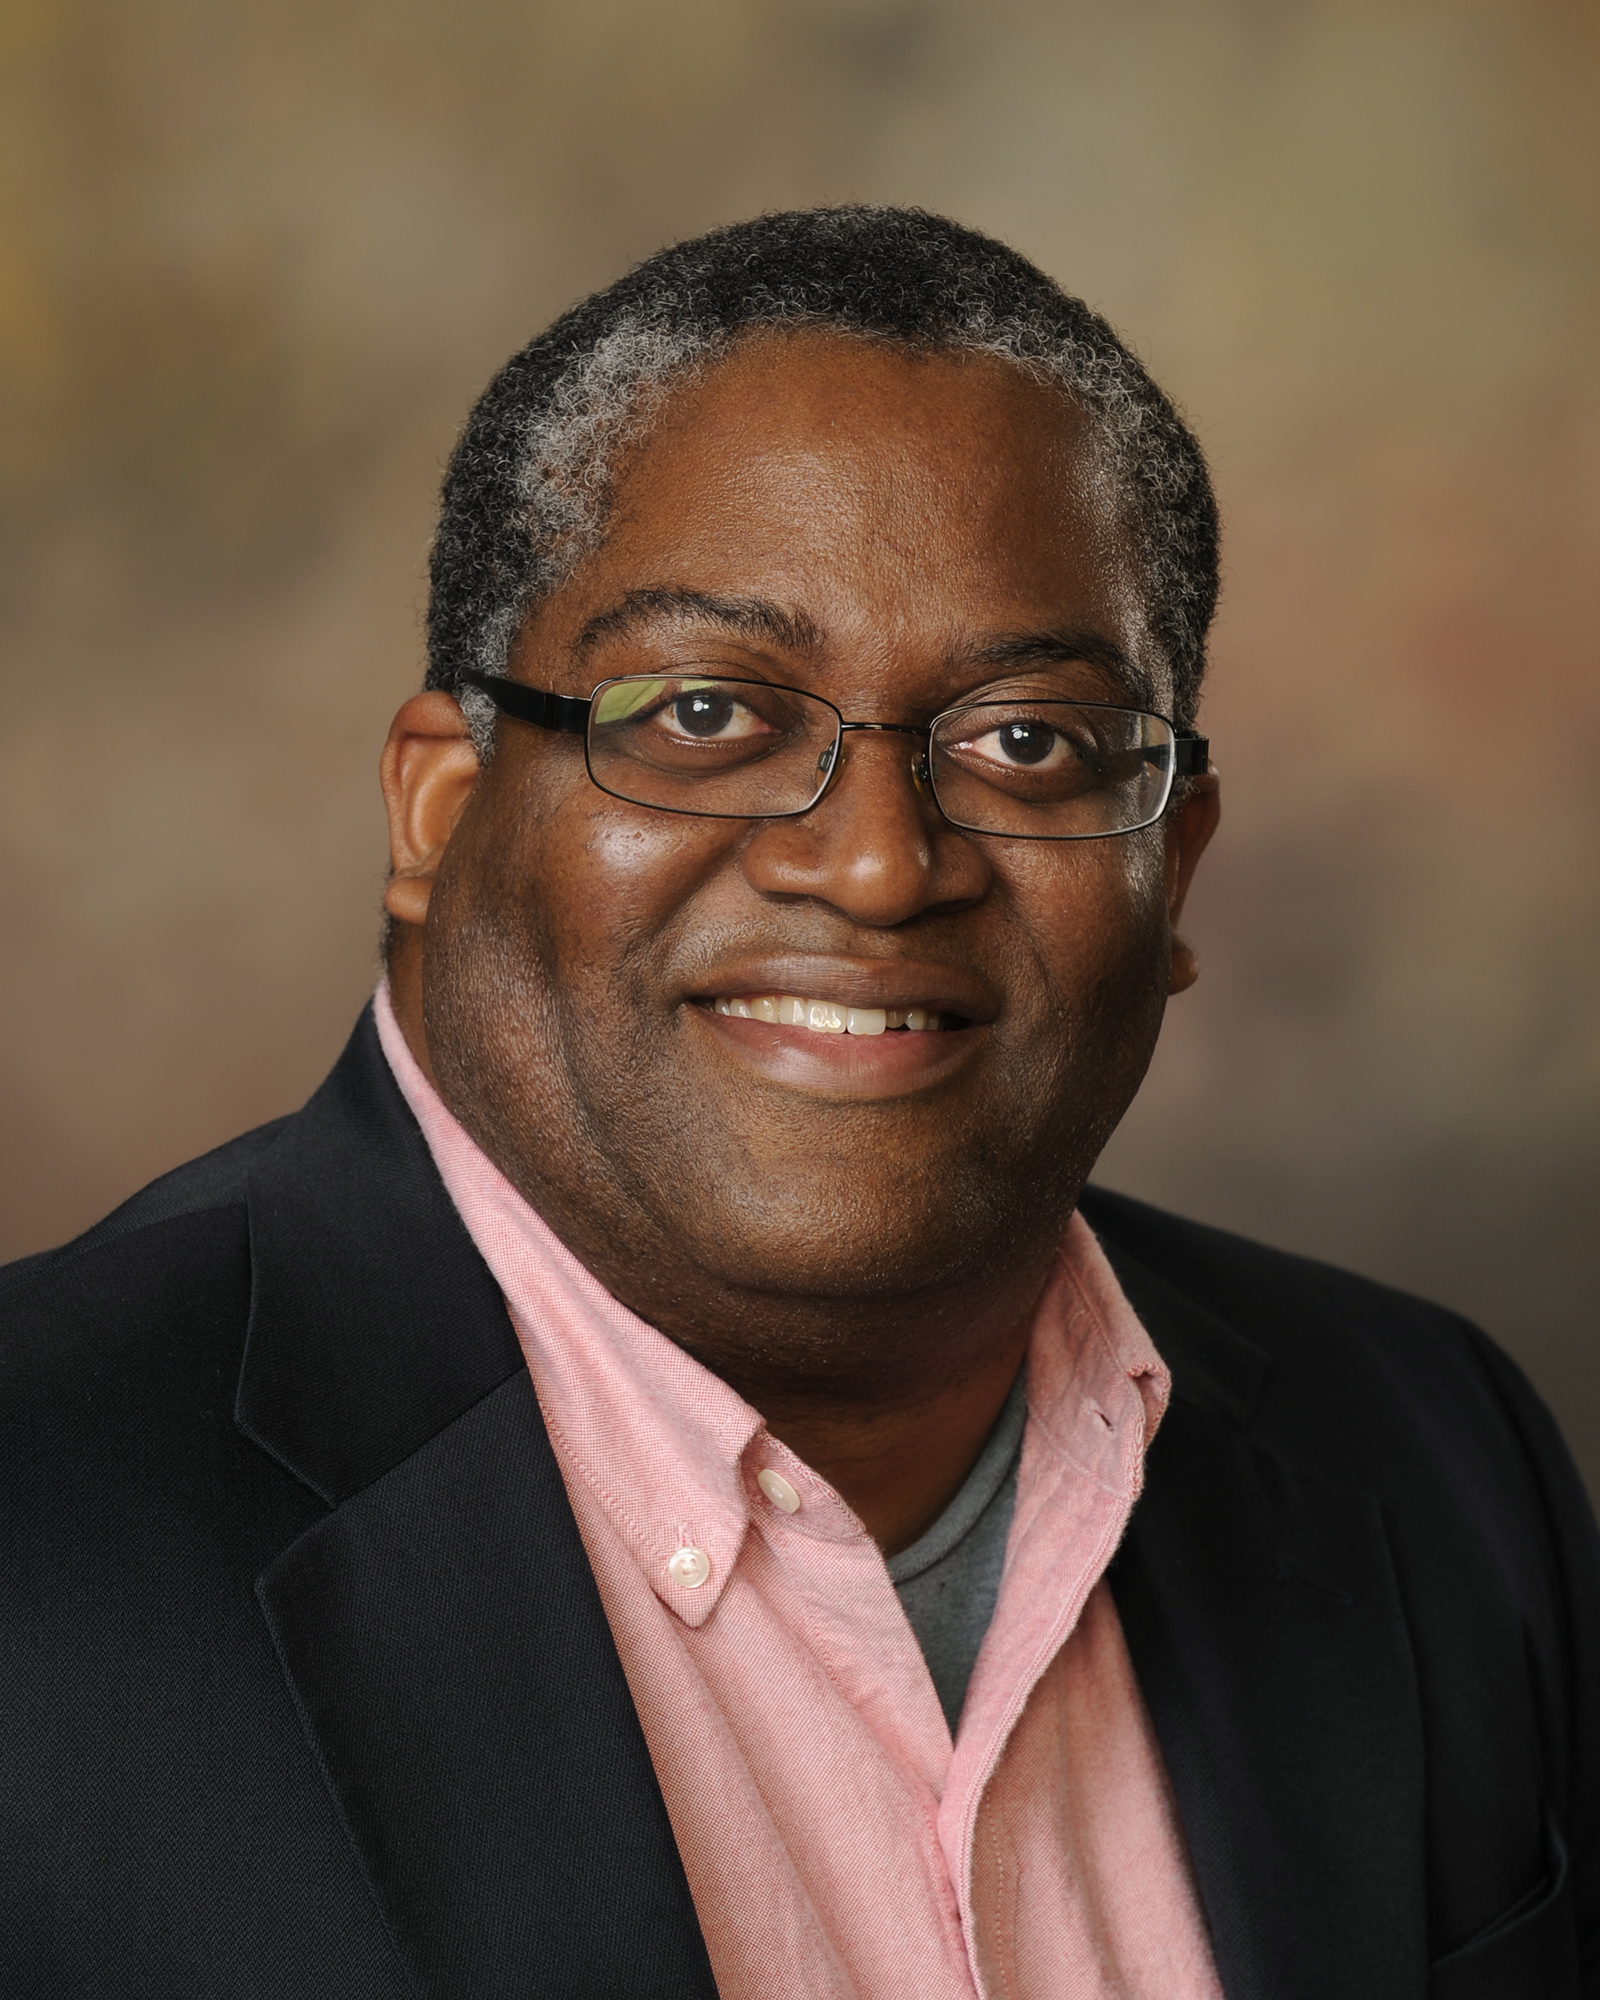 COSAM’s Ed Thomas Jr. named to National Science Foundation Advisory Committee for Mathematical and Physical Sciences